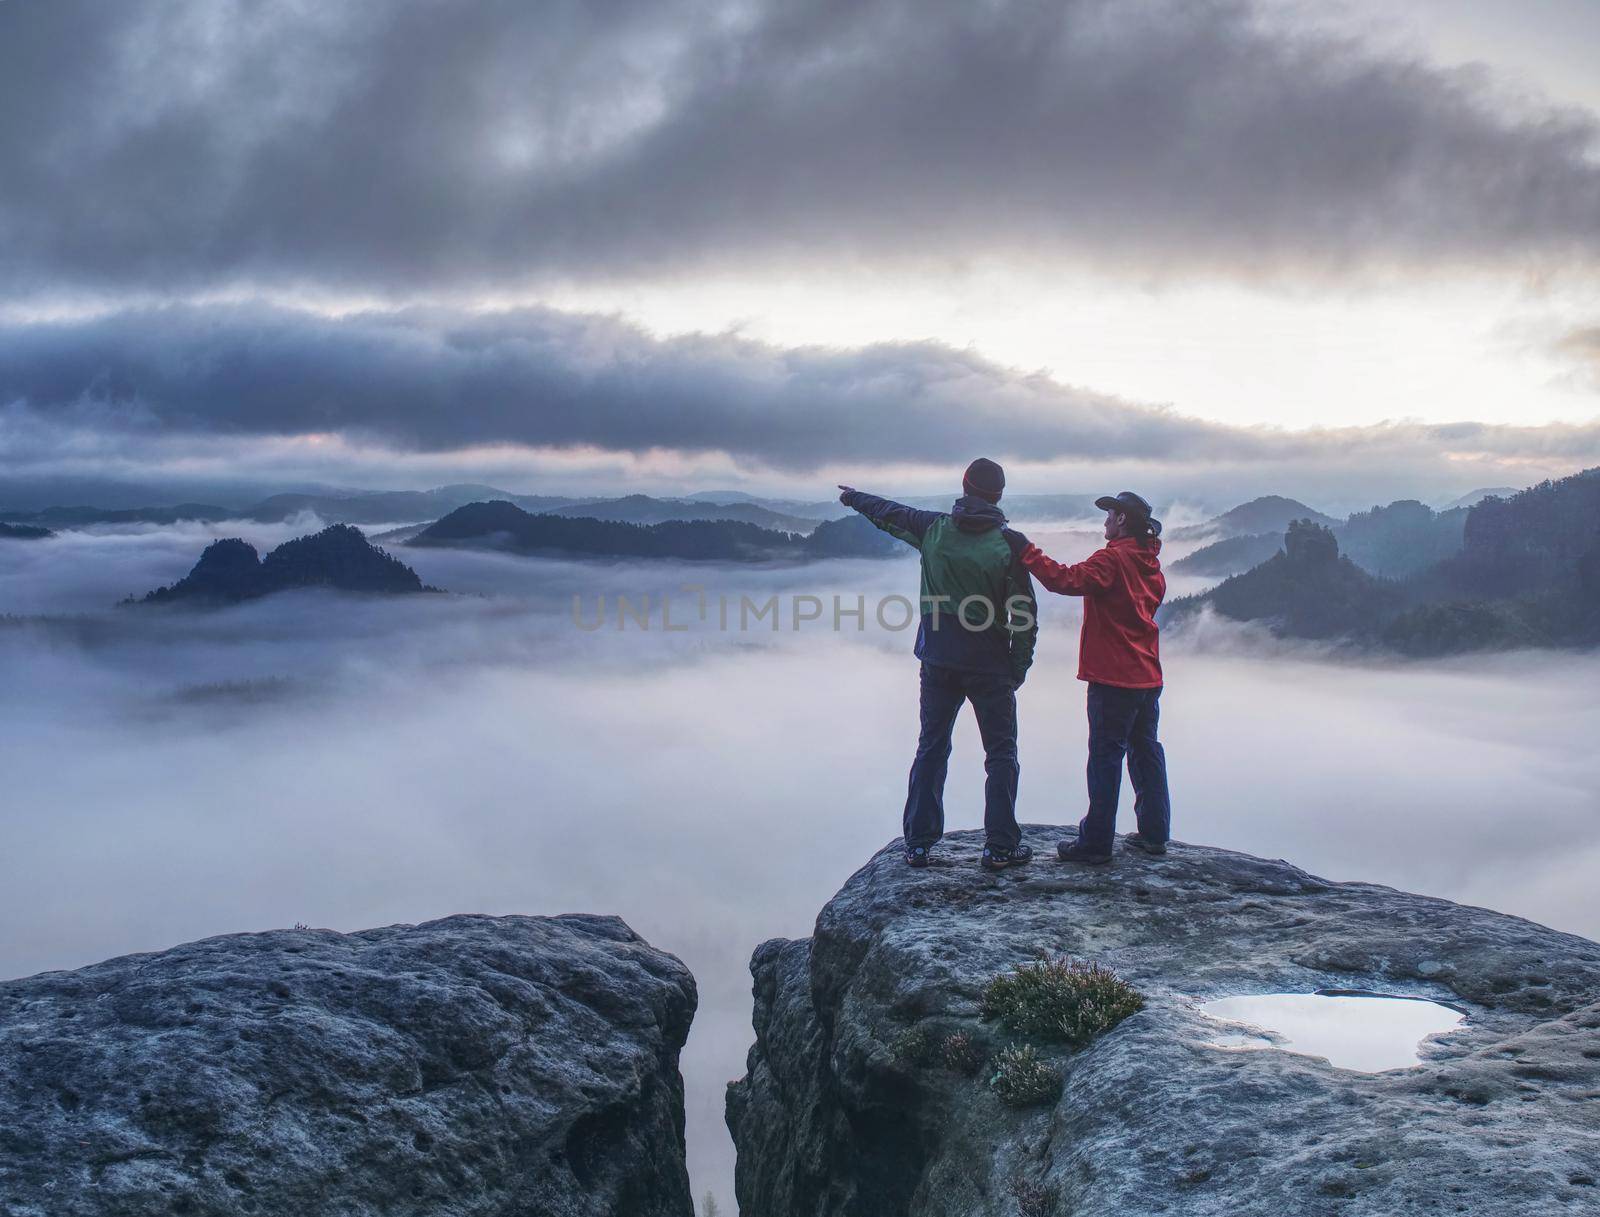 Lovers mirroring in water eye at mountain summit above thick mist.  Climbing couple at top of summit with amazing aerial view